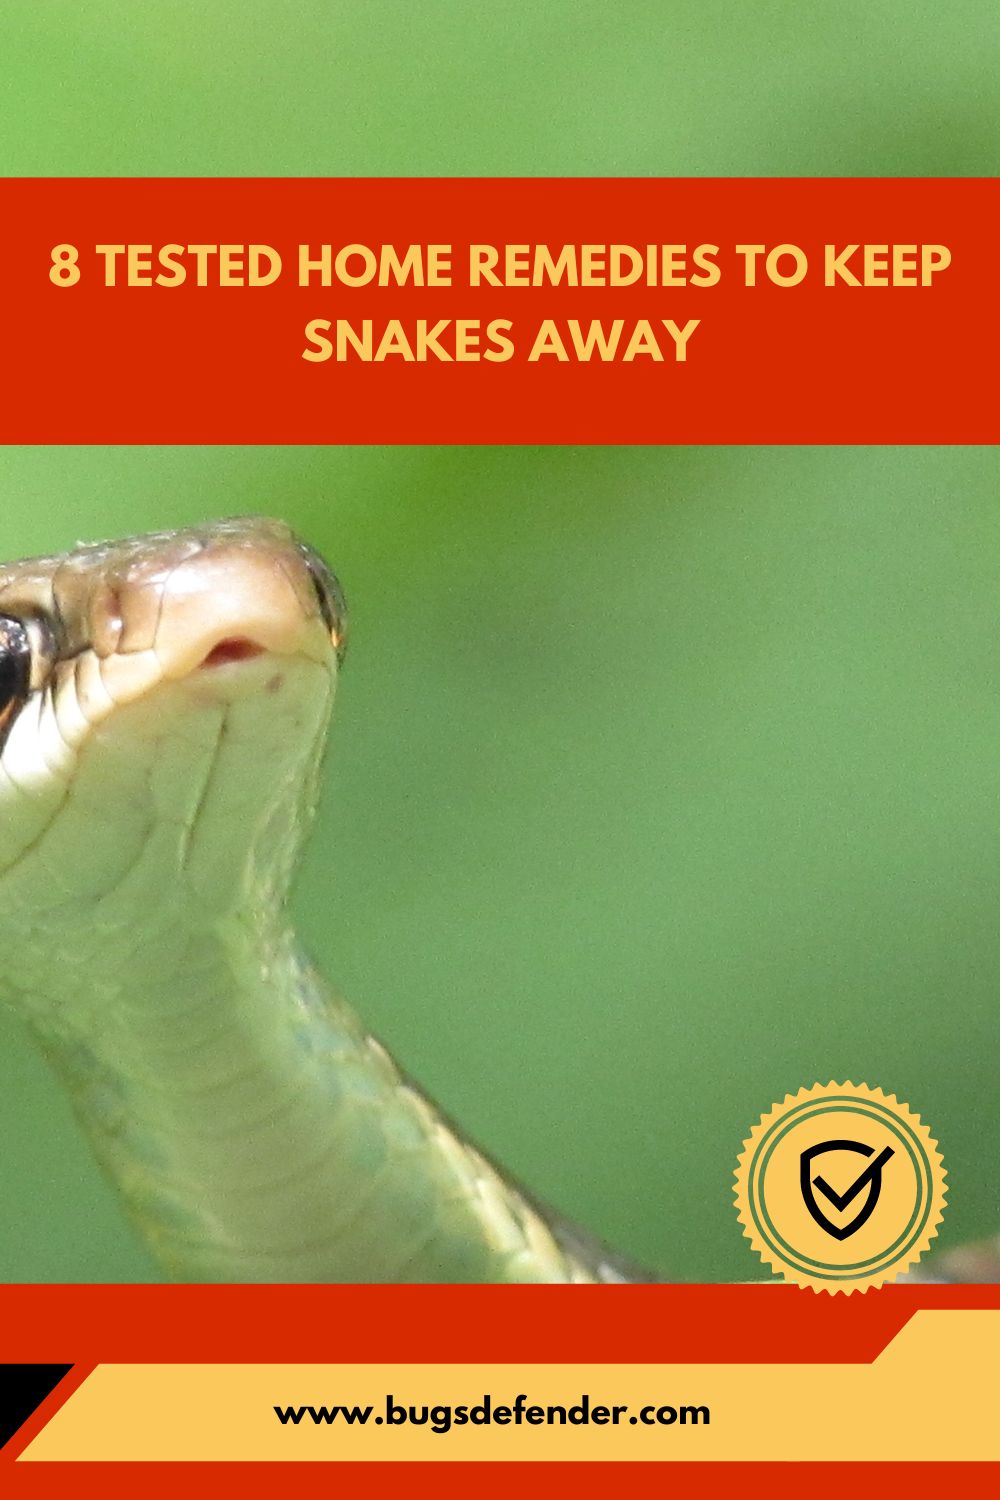 8 Tested Home Remedies To Keep Snakes Away pin2